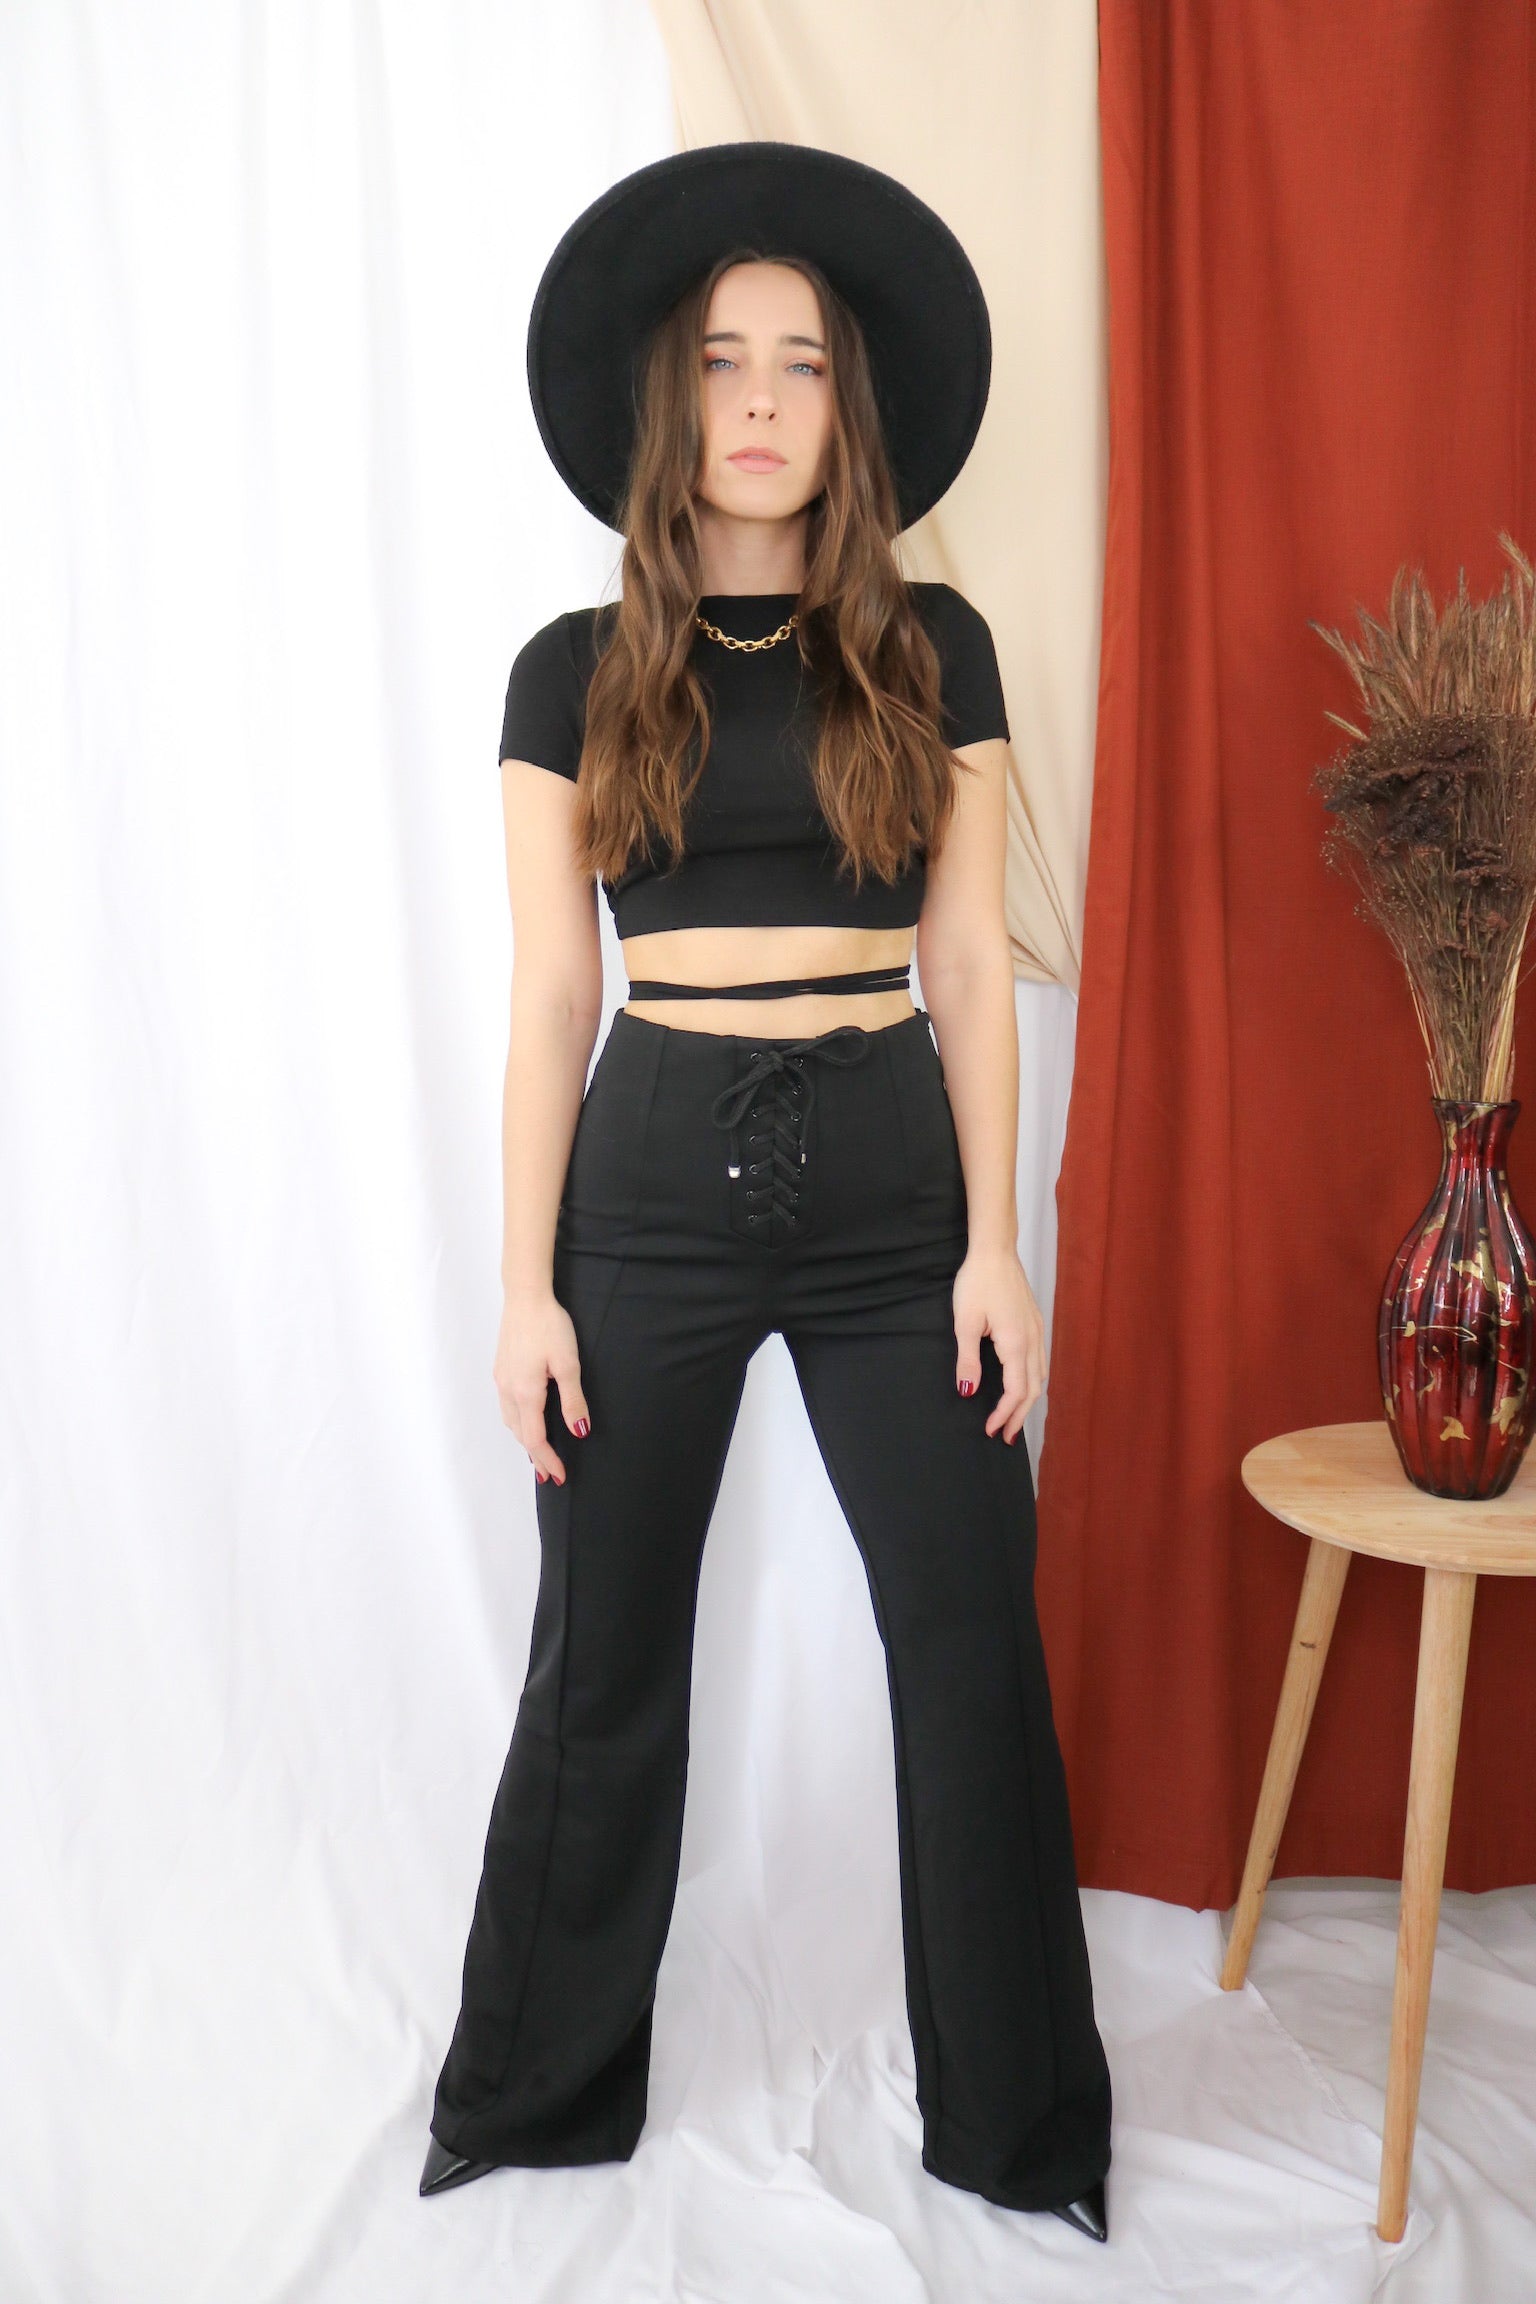 Brunette models outfit for Scarlette the Label, an online fashion boutique for women. Wears an open back black crop top and flare wide leg tie pants in black. Paired with wide brim rancher hat.